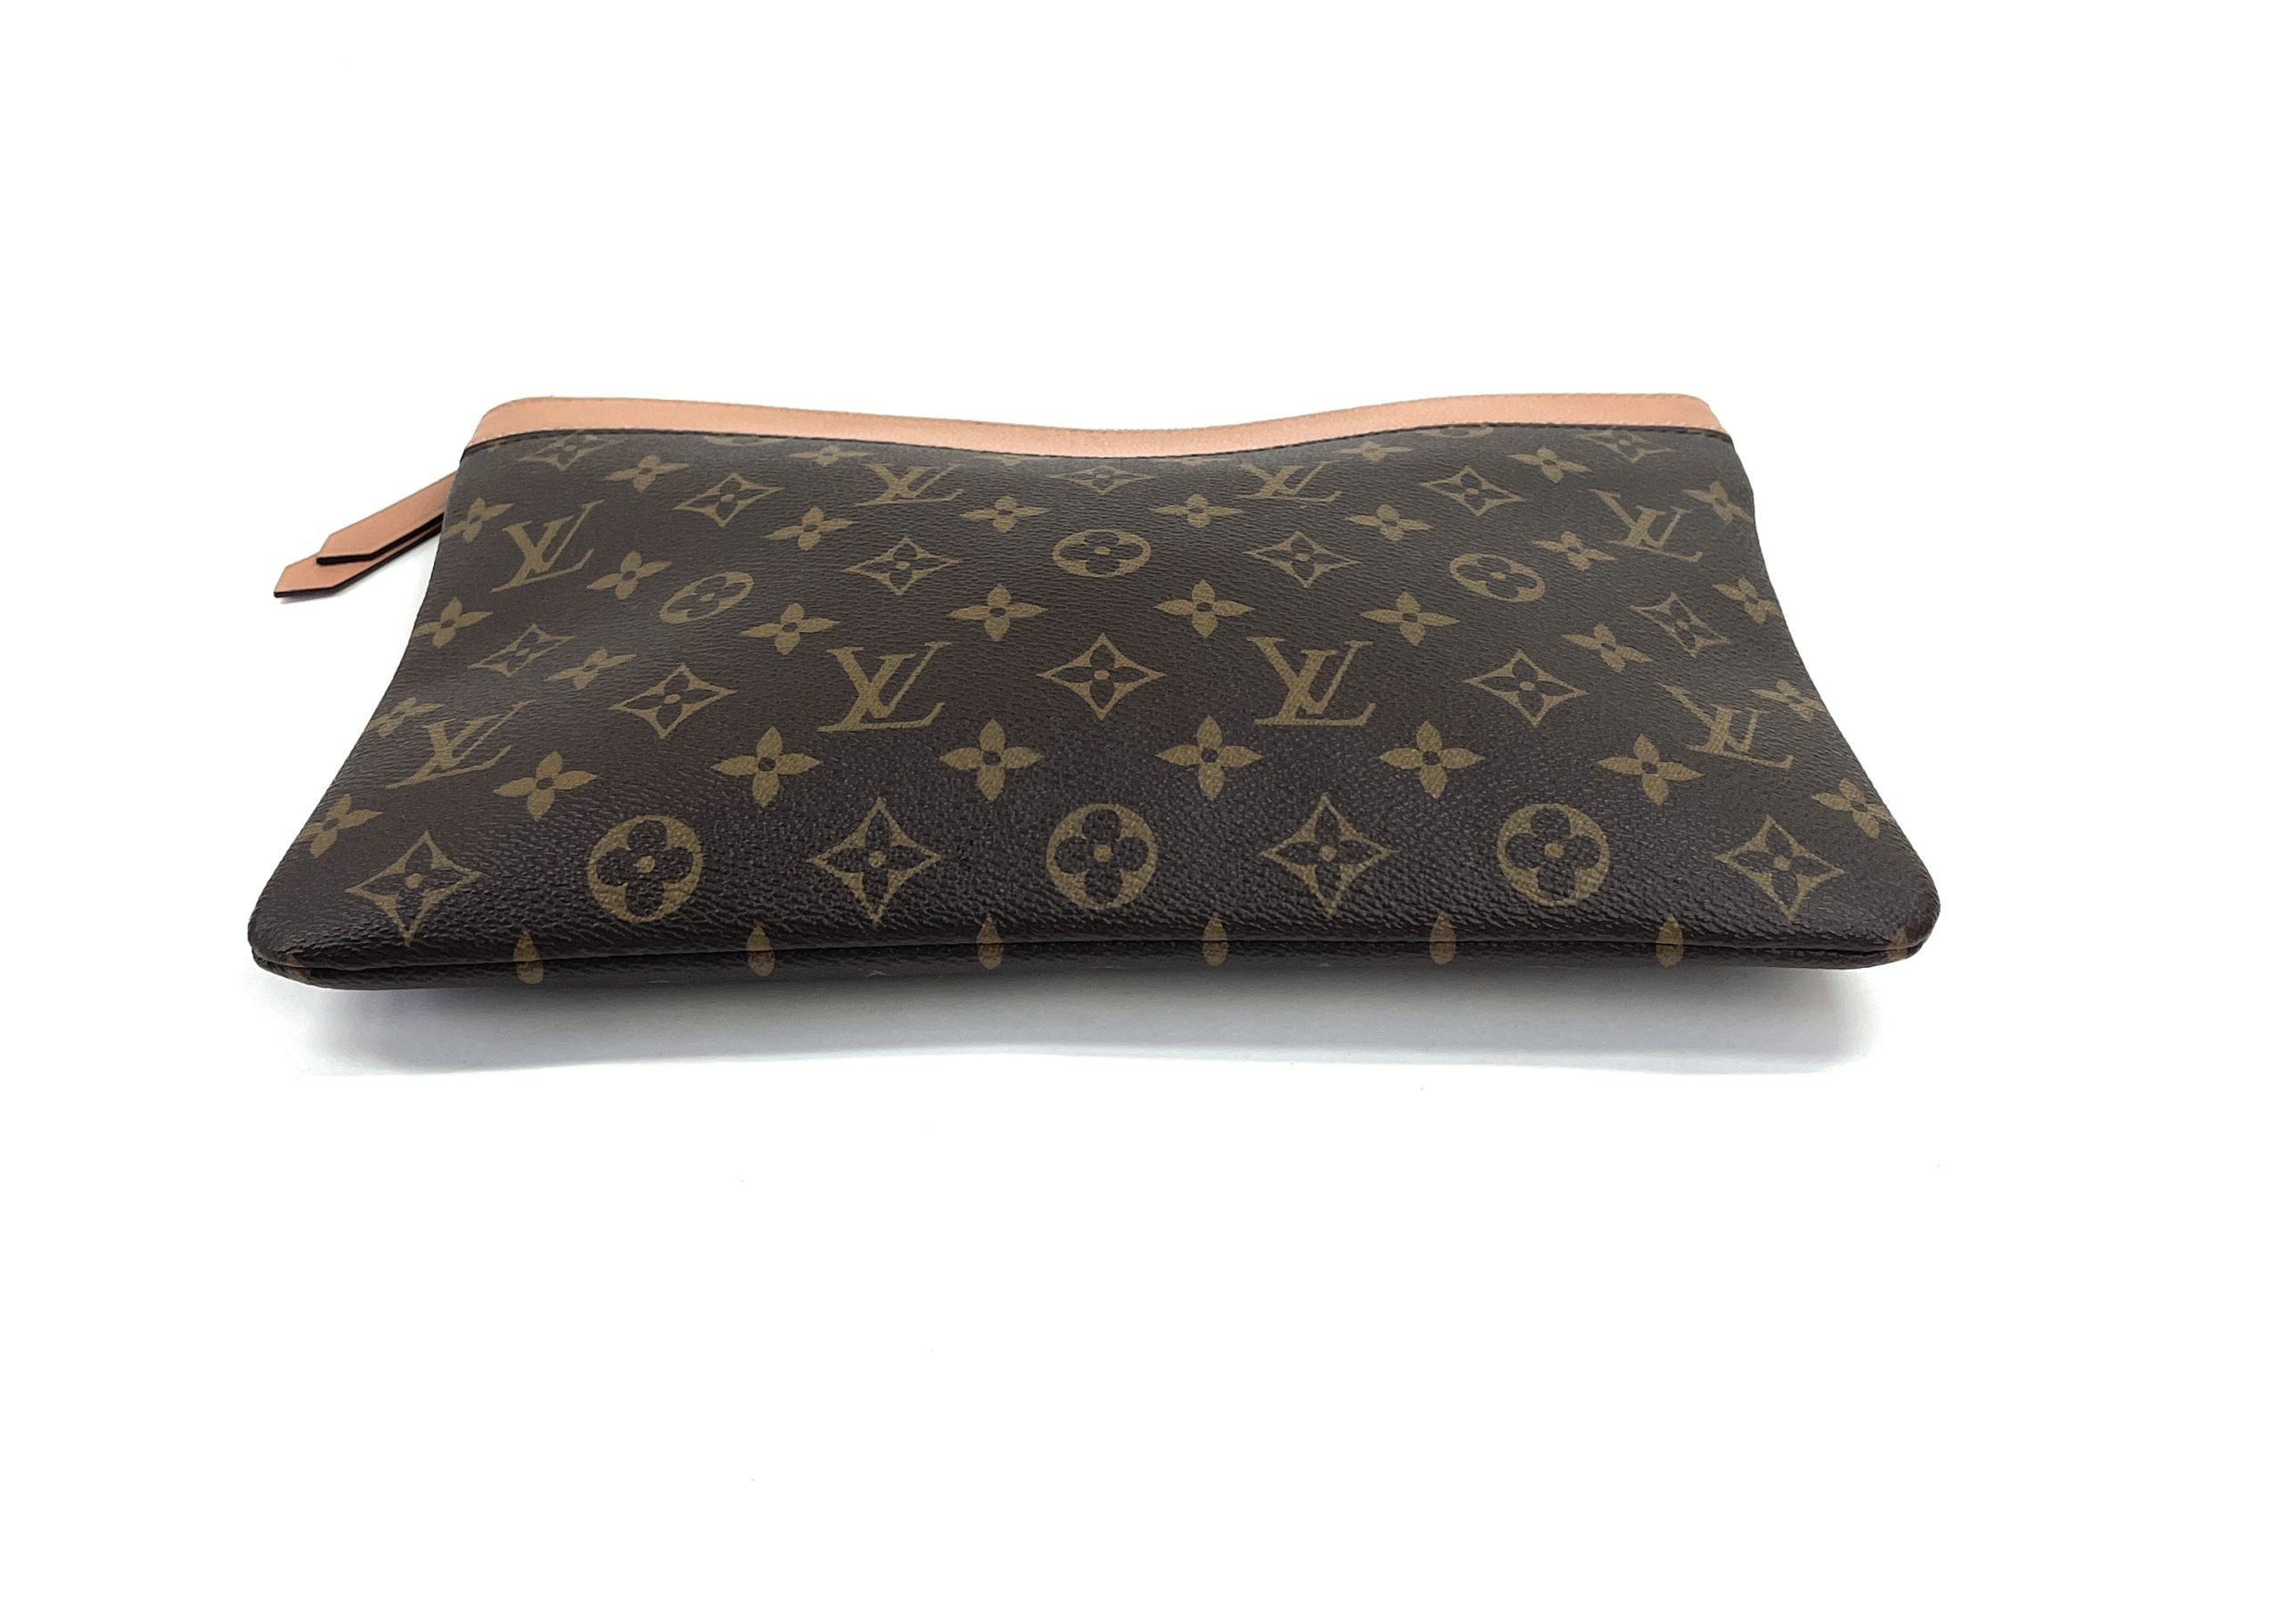 Clutch Bags Louis Vuitton LV Daily Pouch New